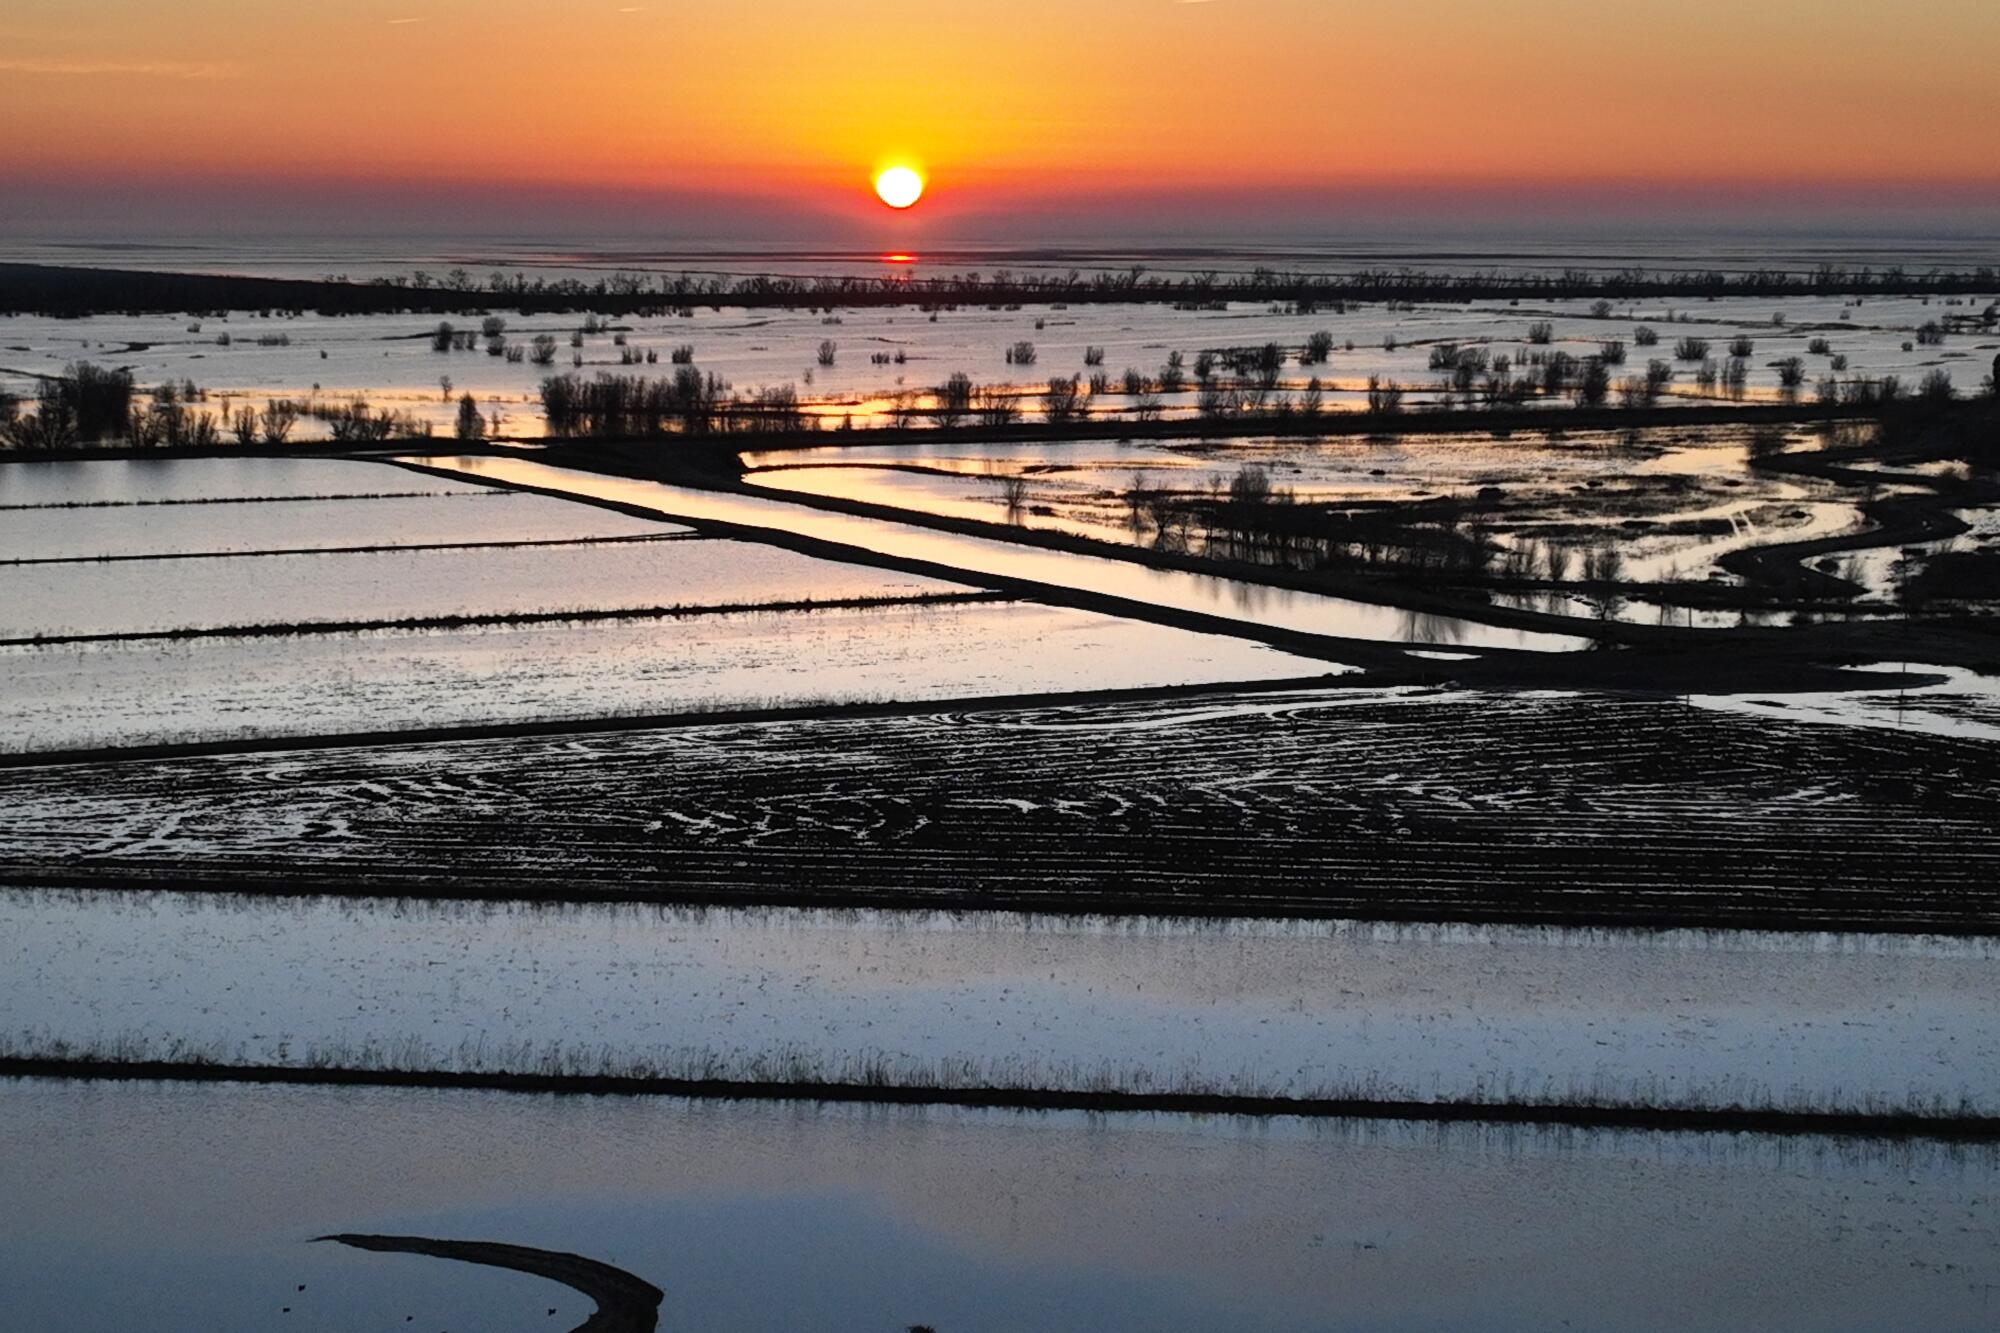 The sun rises over flooded growing fields. 